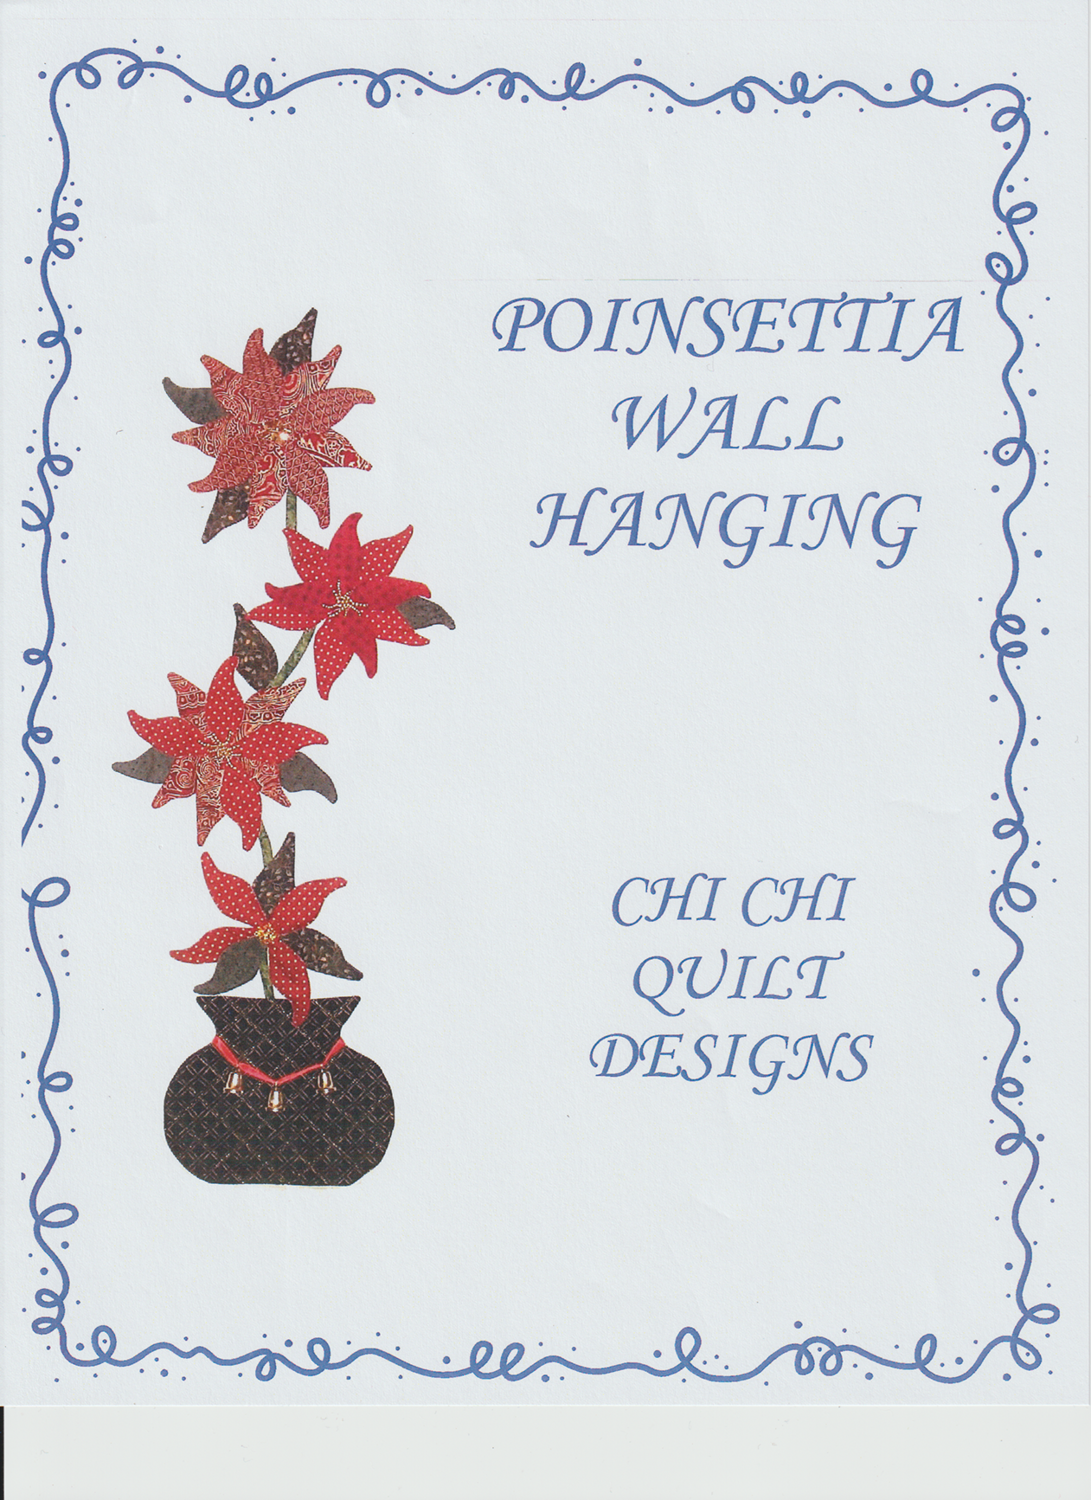 Poinsetta Wall Hanging